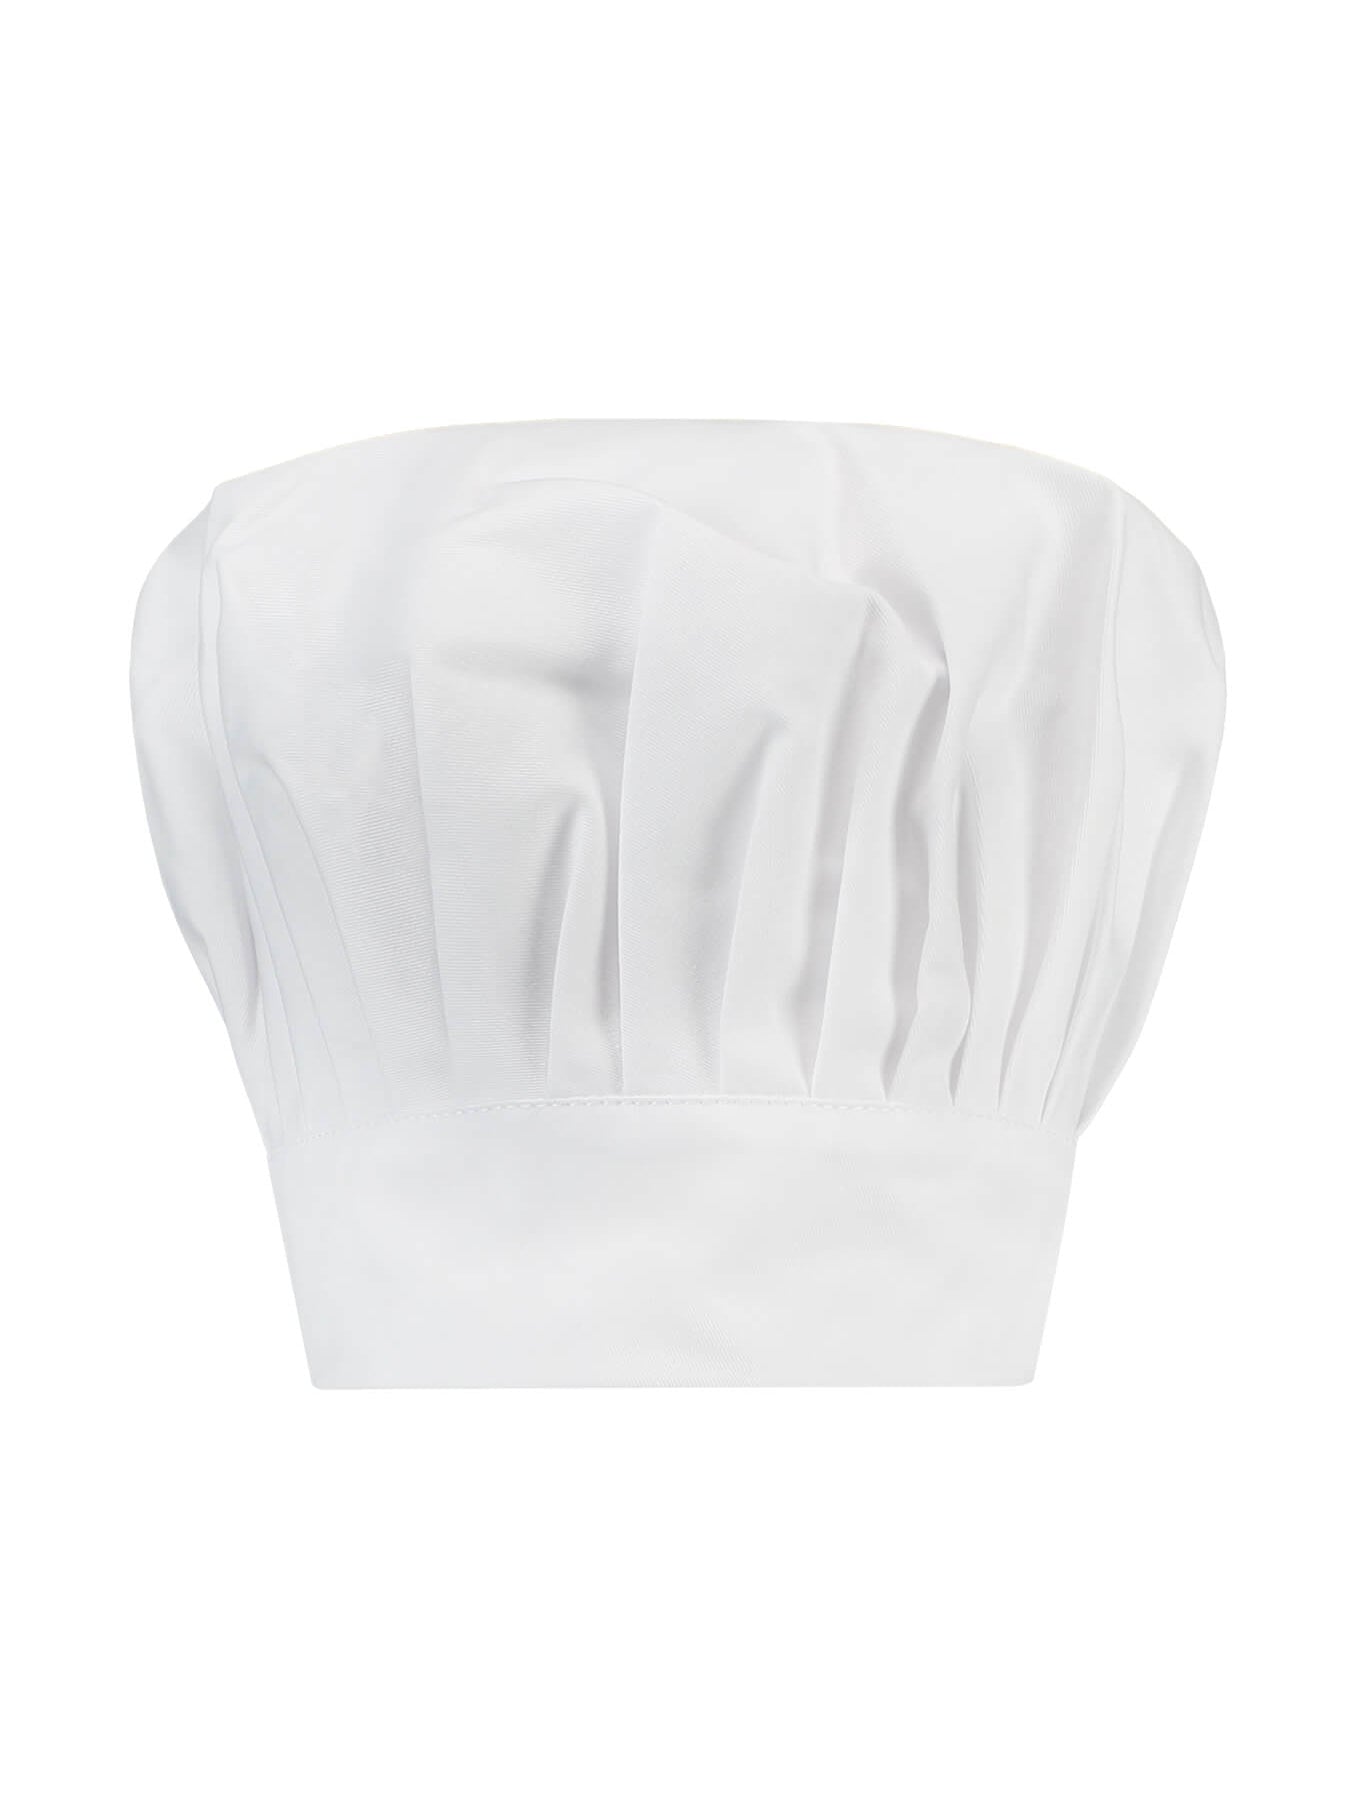 Chefs Hat Kids White by The Little Chef Collection -  ChefsCotton